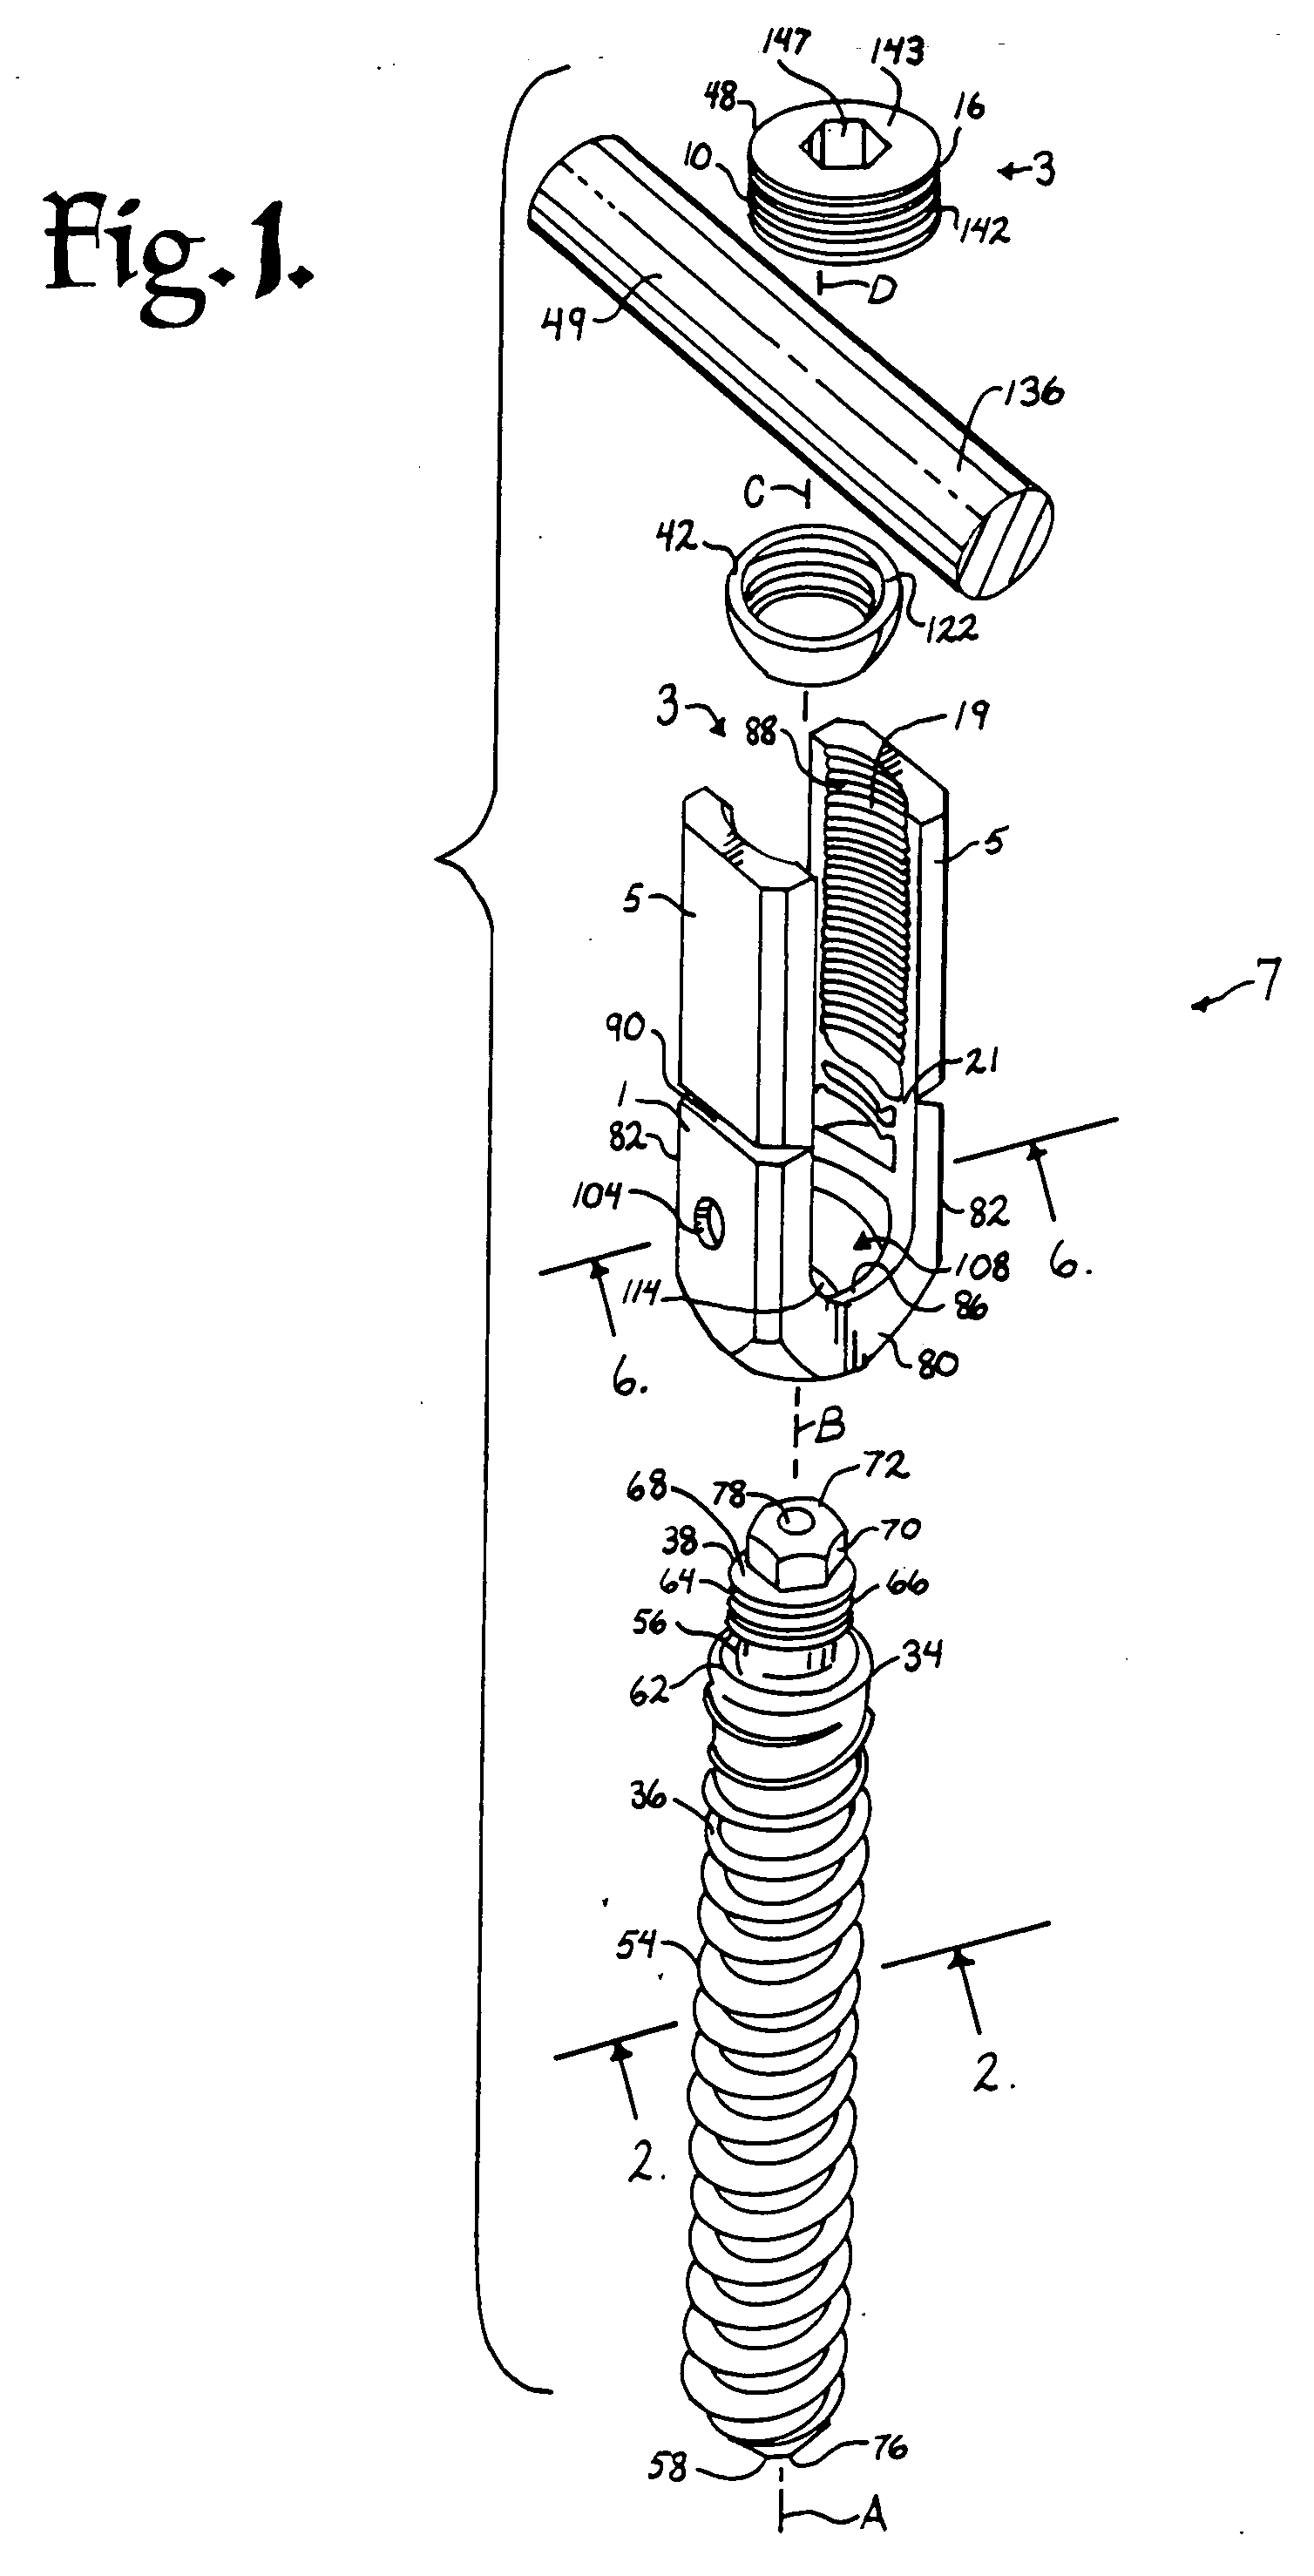 Helical reverse angle guide and advancement structure with break-off extensions